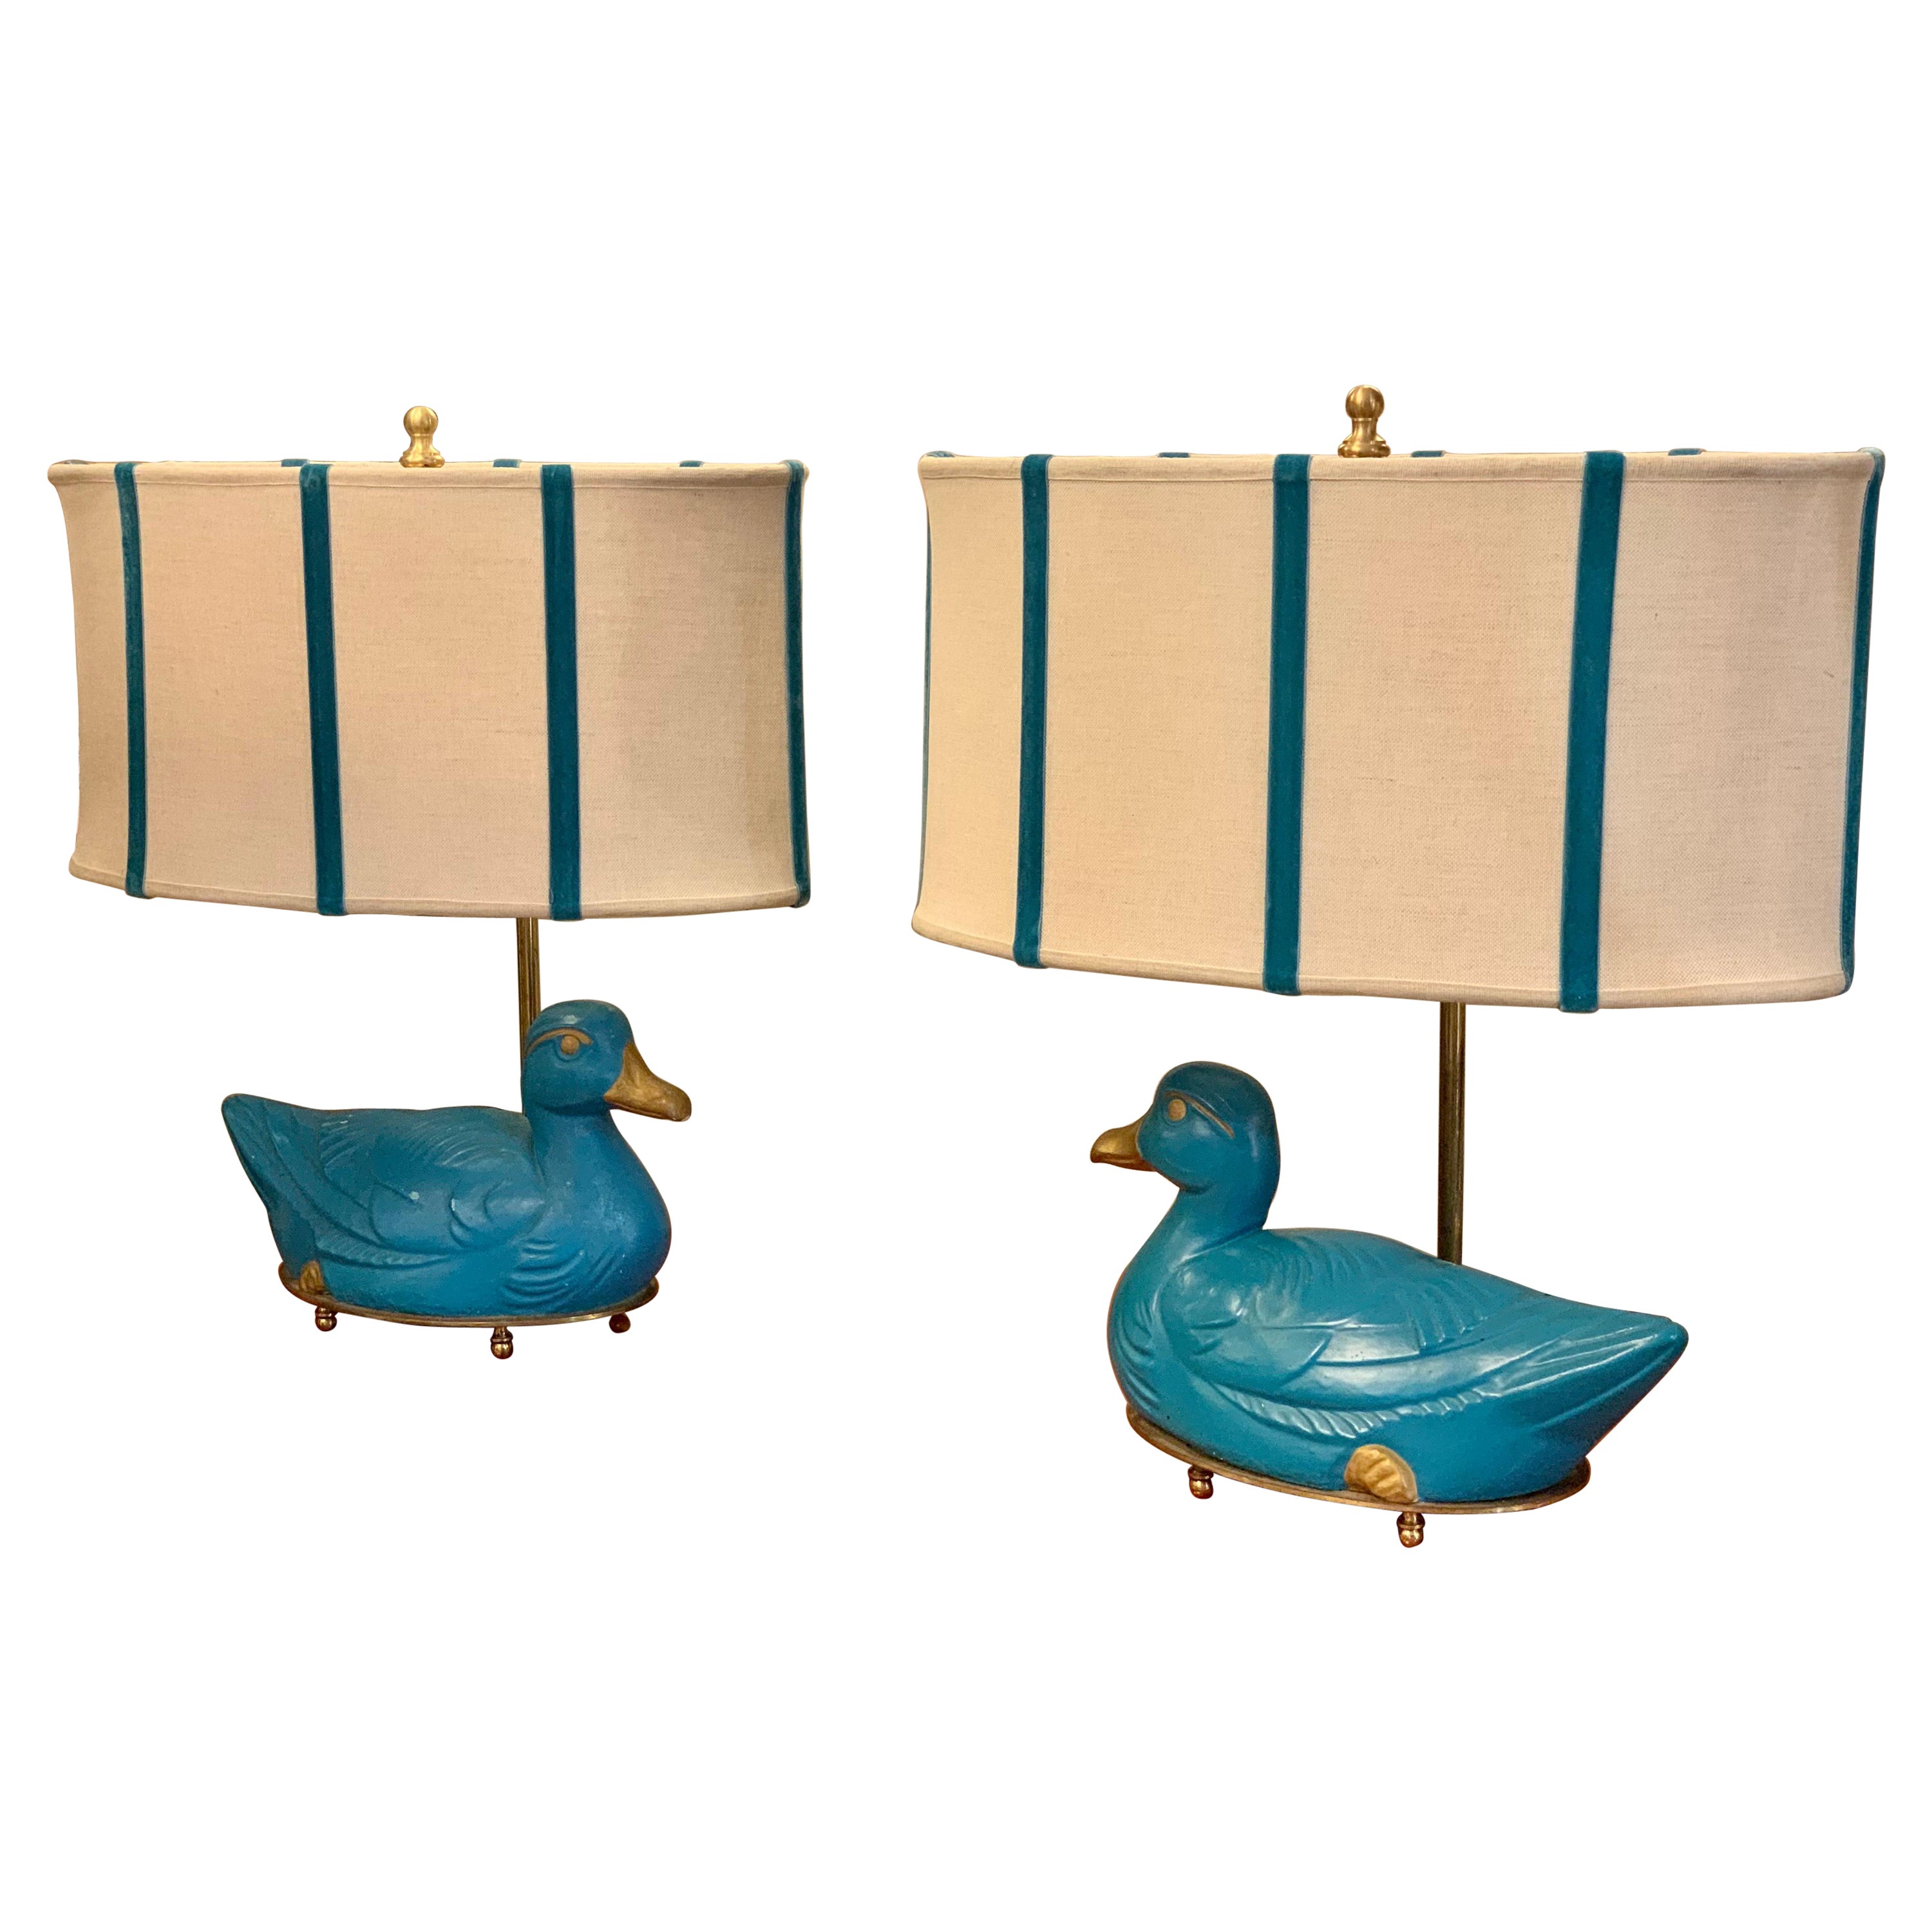 Pair of Turquoise Bronze Table Lamps in the Shape of a Duck with Our Lampshades